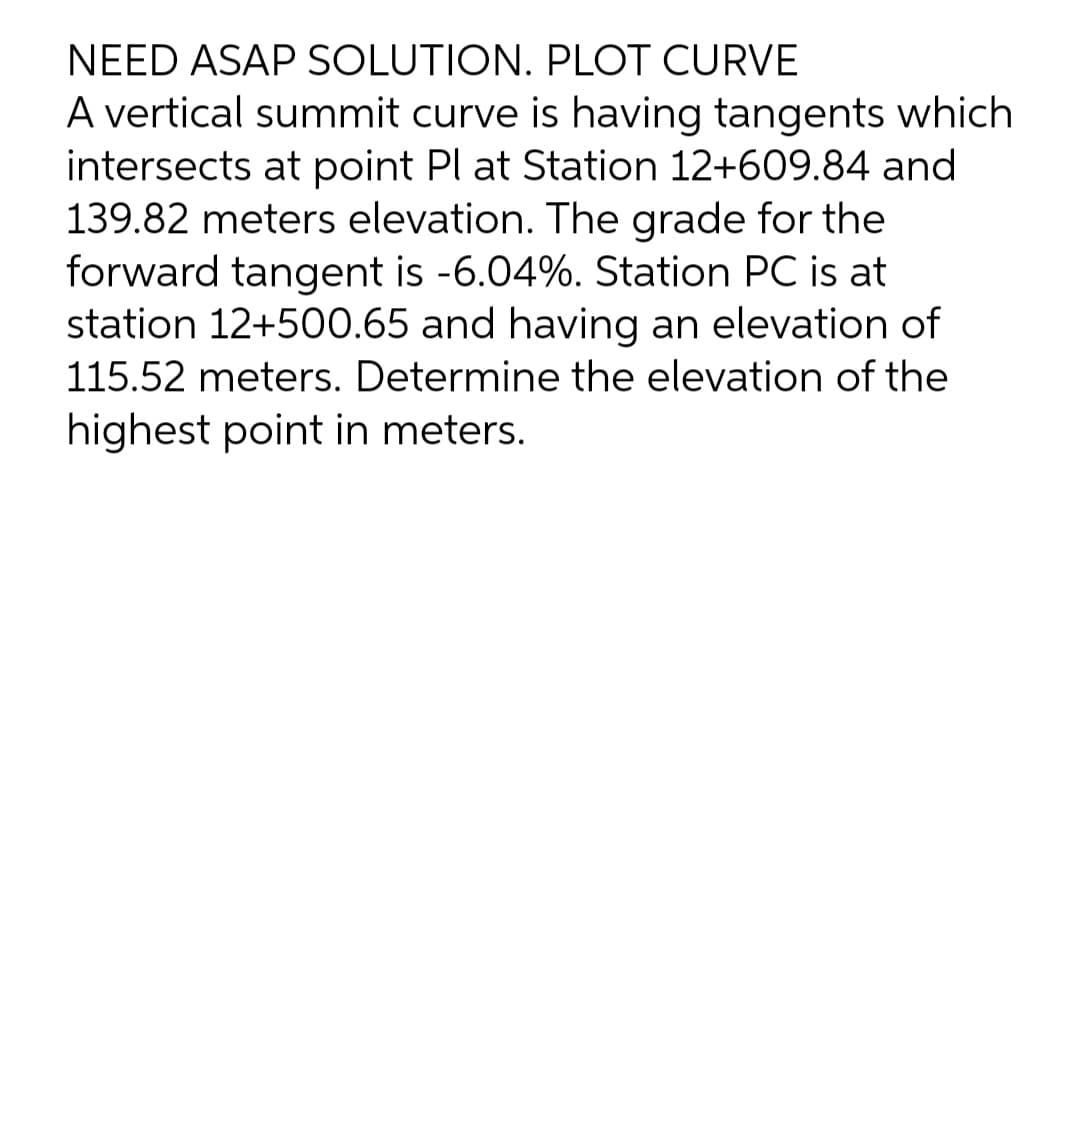 NEED ASAP SOLUTION. PLOT CURVE
A vertical summit curve is having tangents which
intersects at point Pl at Station 12+609.84 and
139.82 meters elevation. The grade for the
forward tangent is -6.04%. Station PC is at
station 12+500.65 and having an elevation of
115.52 meters. Determine the elevation of the
highest point in meters.
